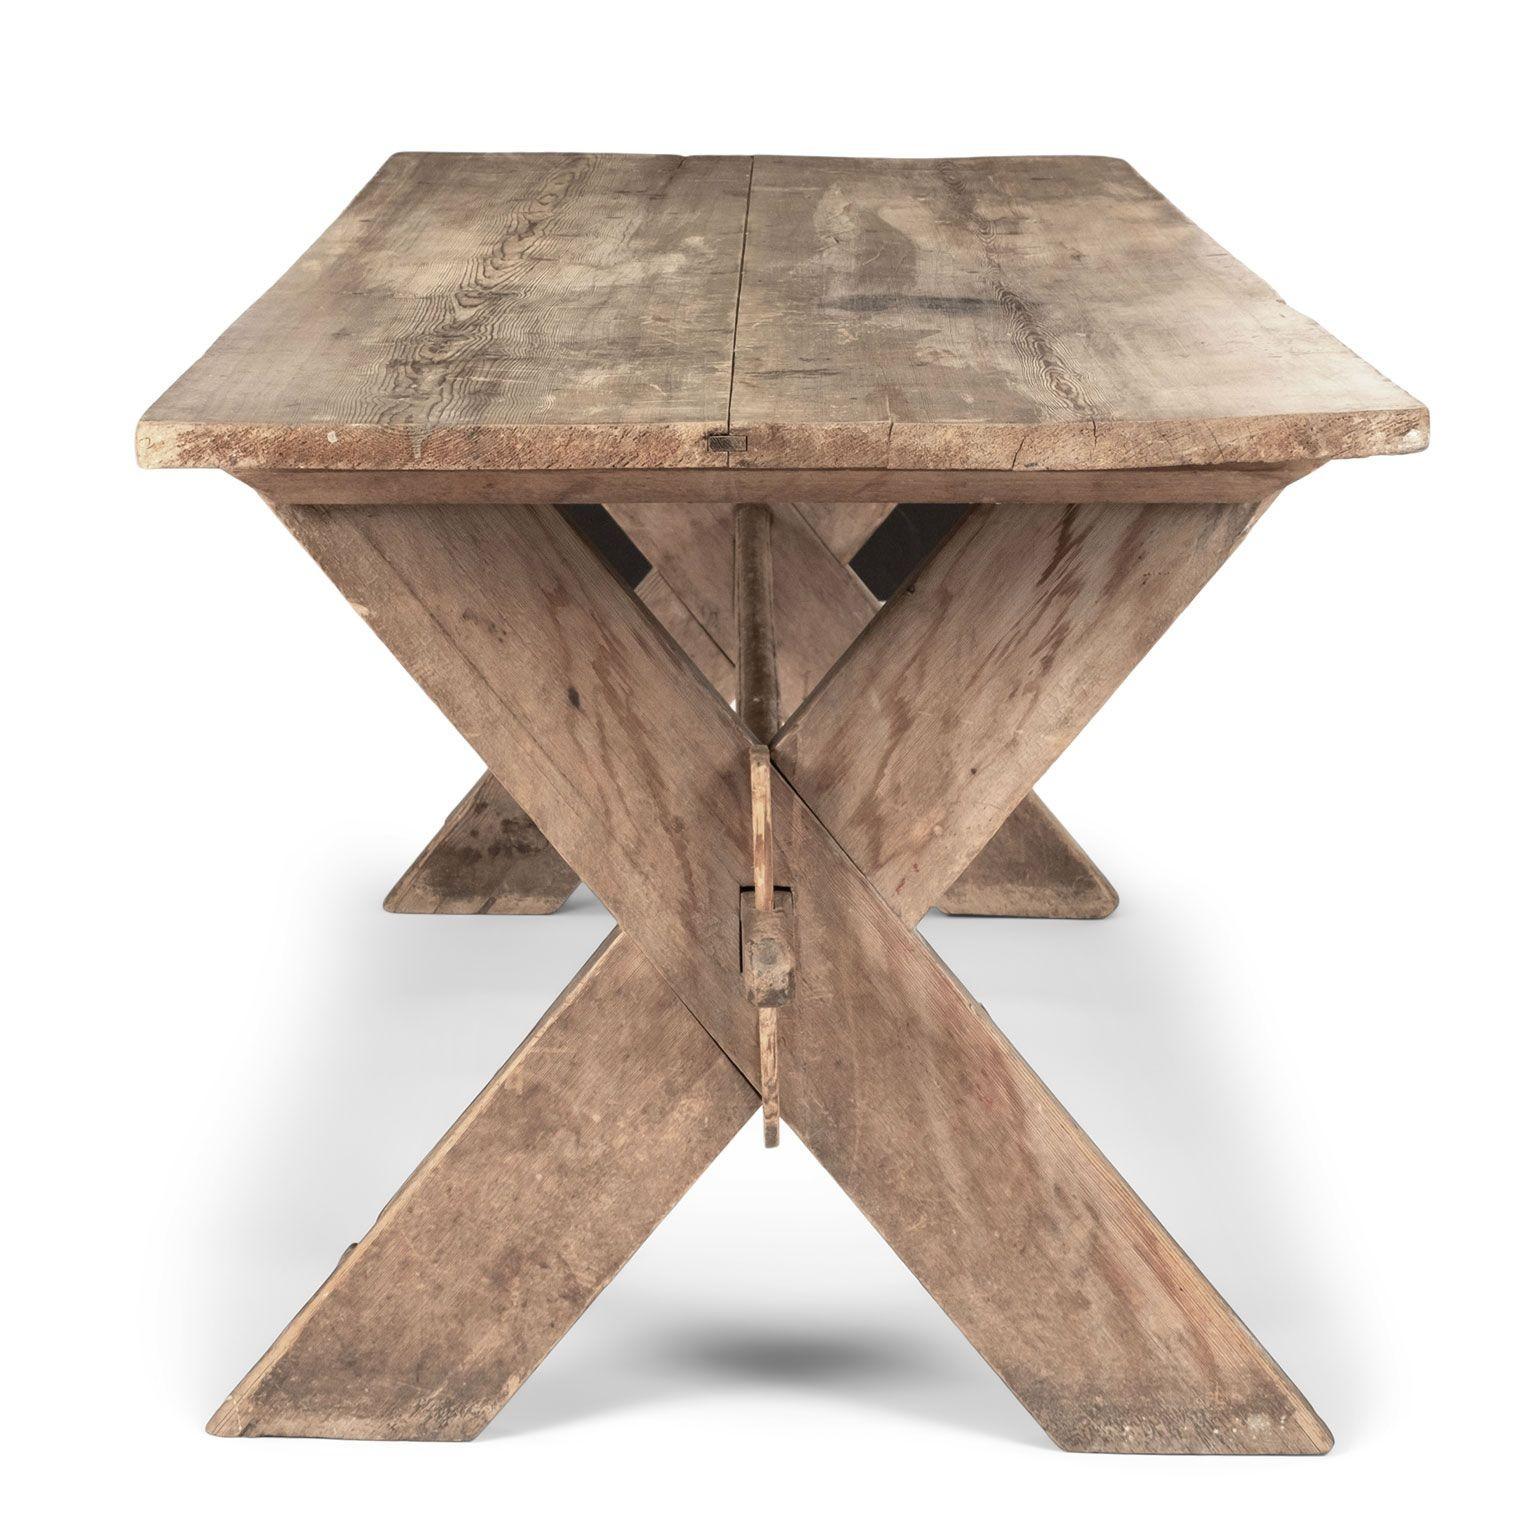 Circa 1810 Swedish pine rustic dining table hand-carved with beautiful patina and color. Supported by a trestle base and X-shaped legs.